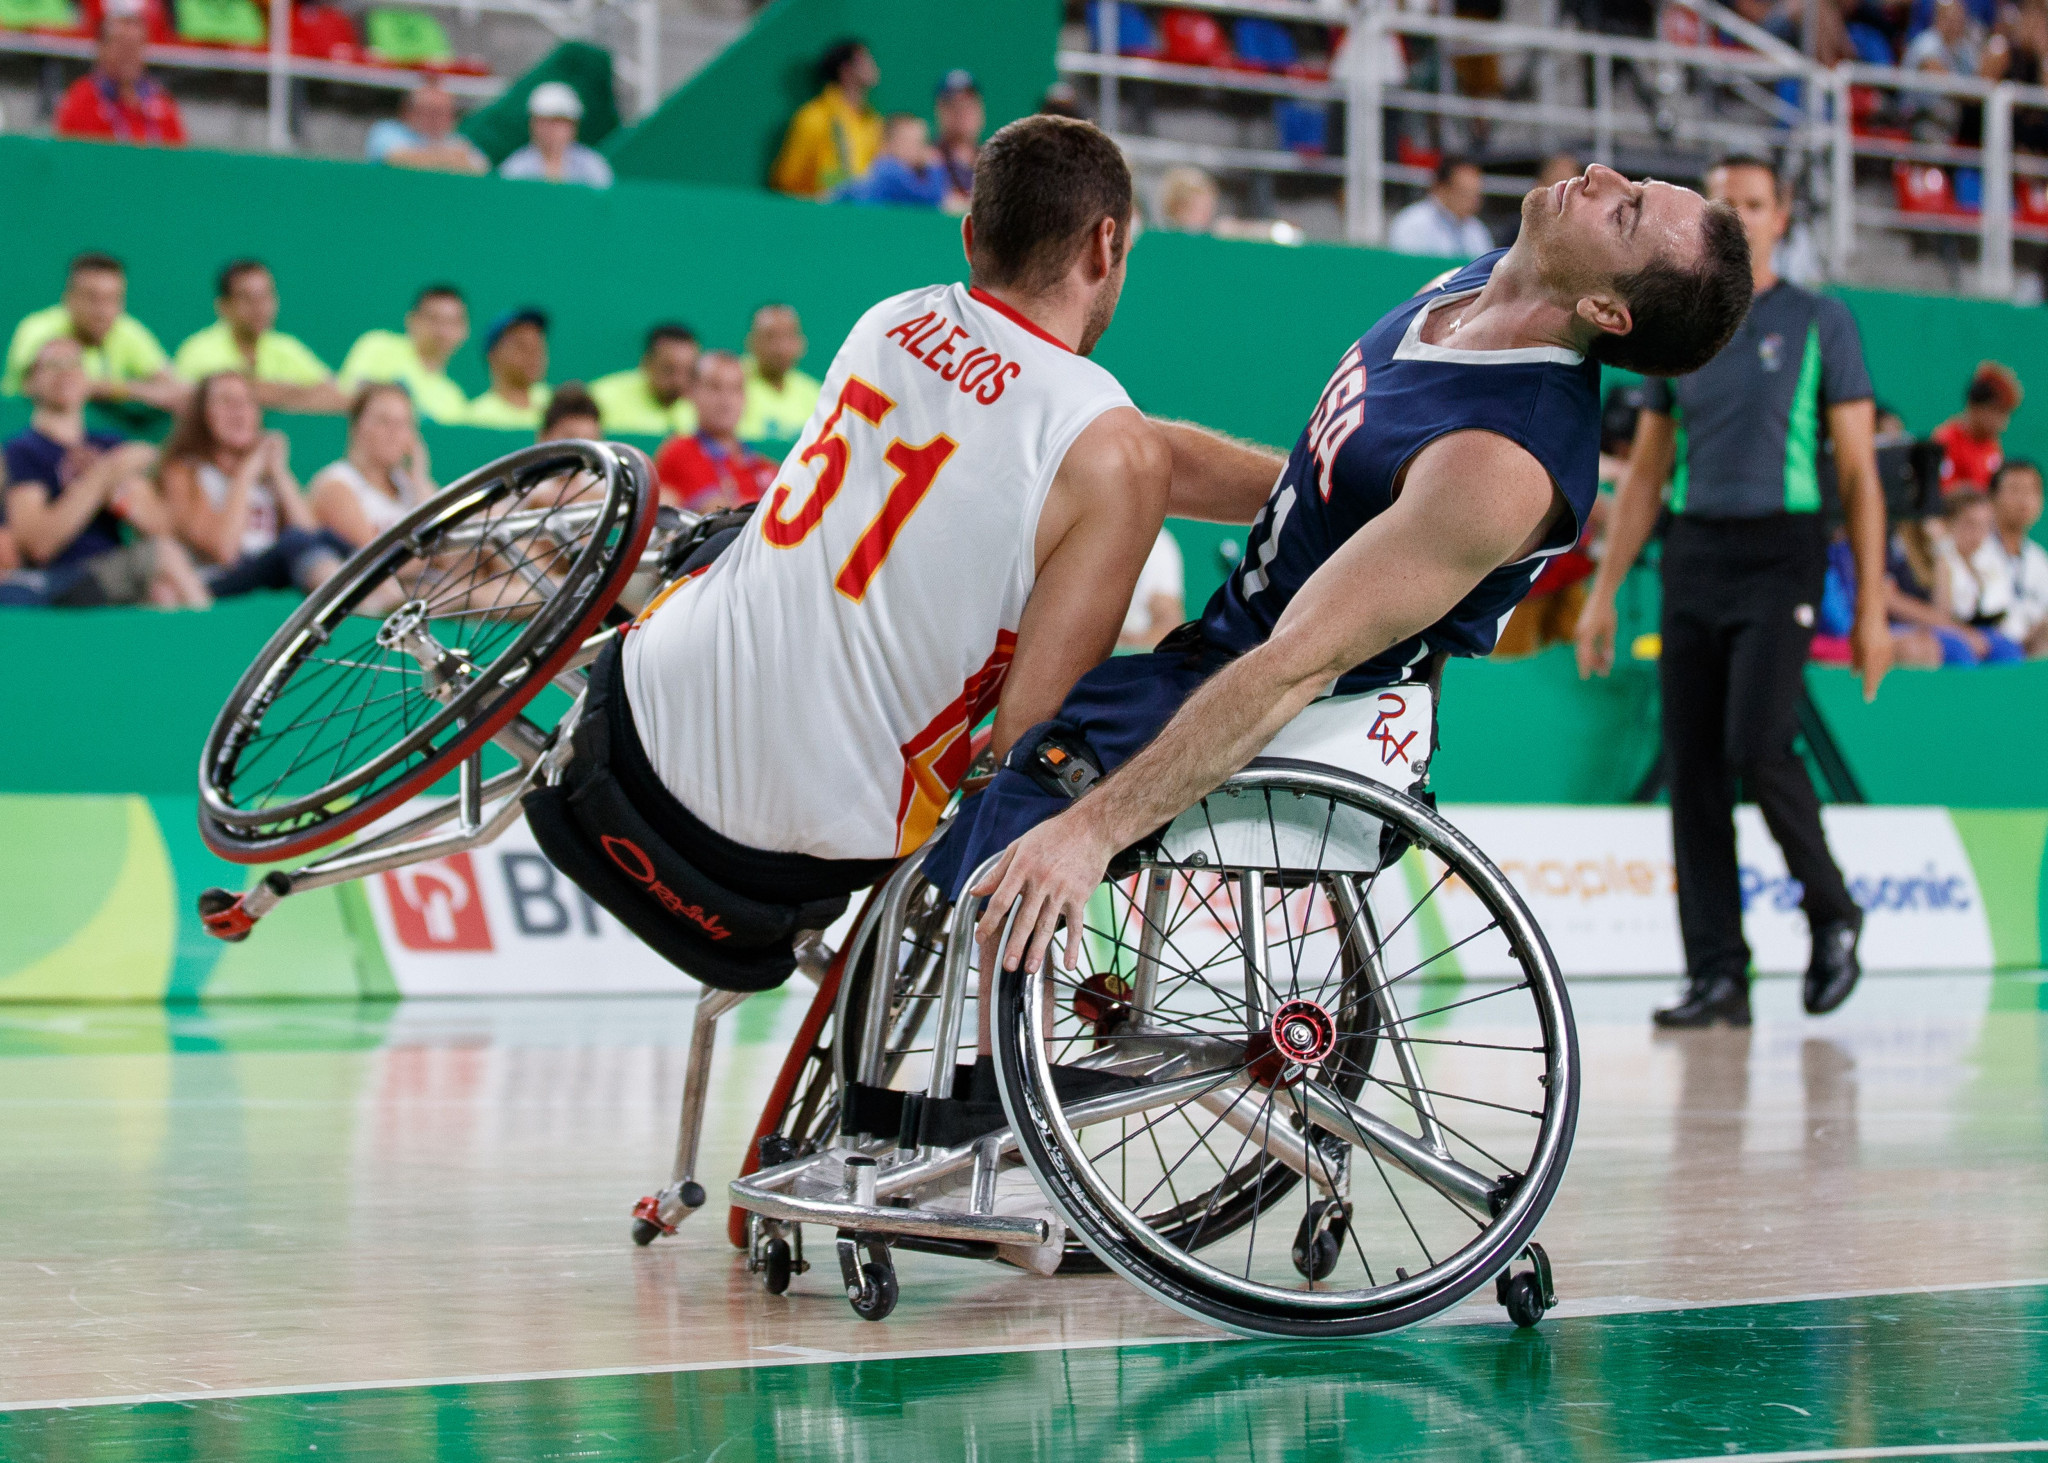 Repechage tournaments will be held in wheelchair basketball ©Getty Images